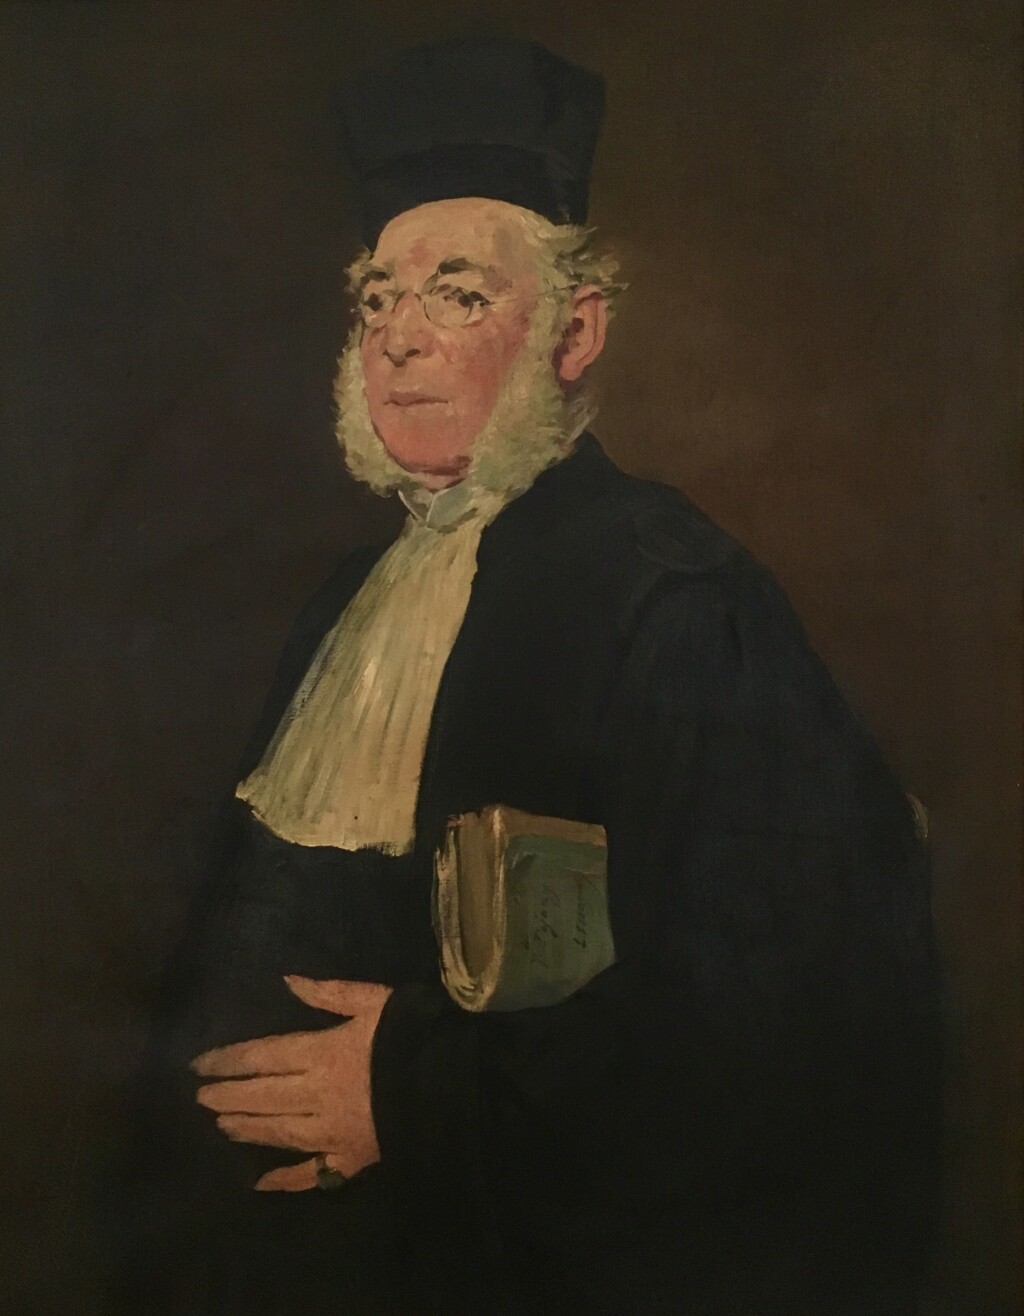 Portrait of Manet's cousin, painted by Manet